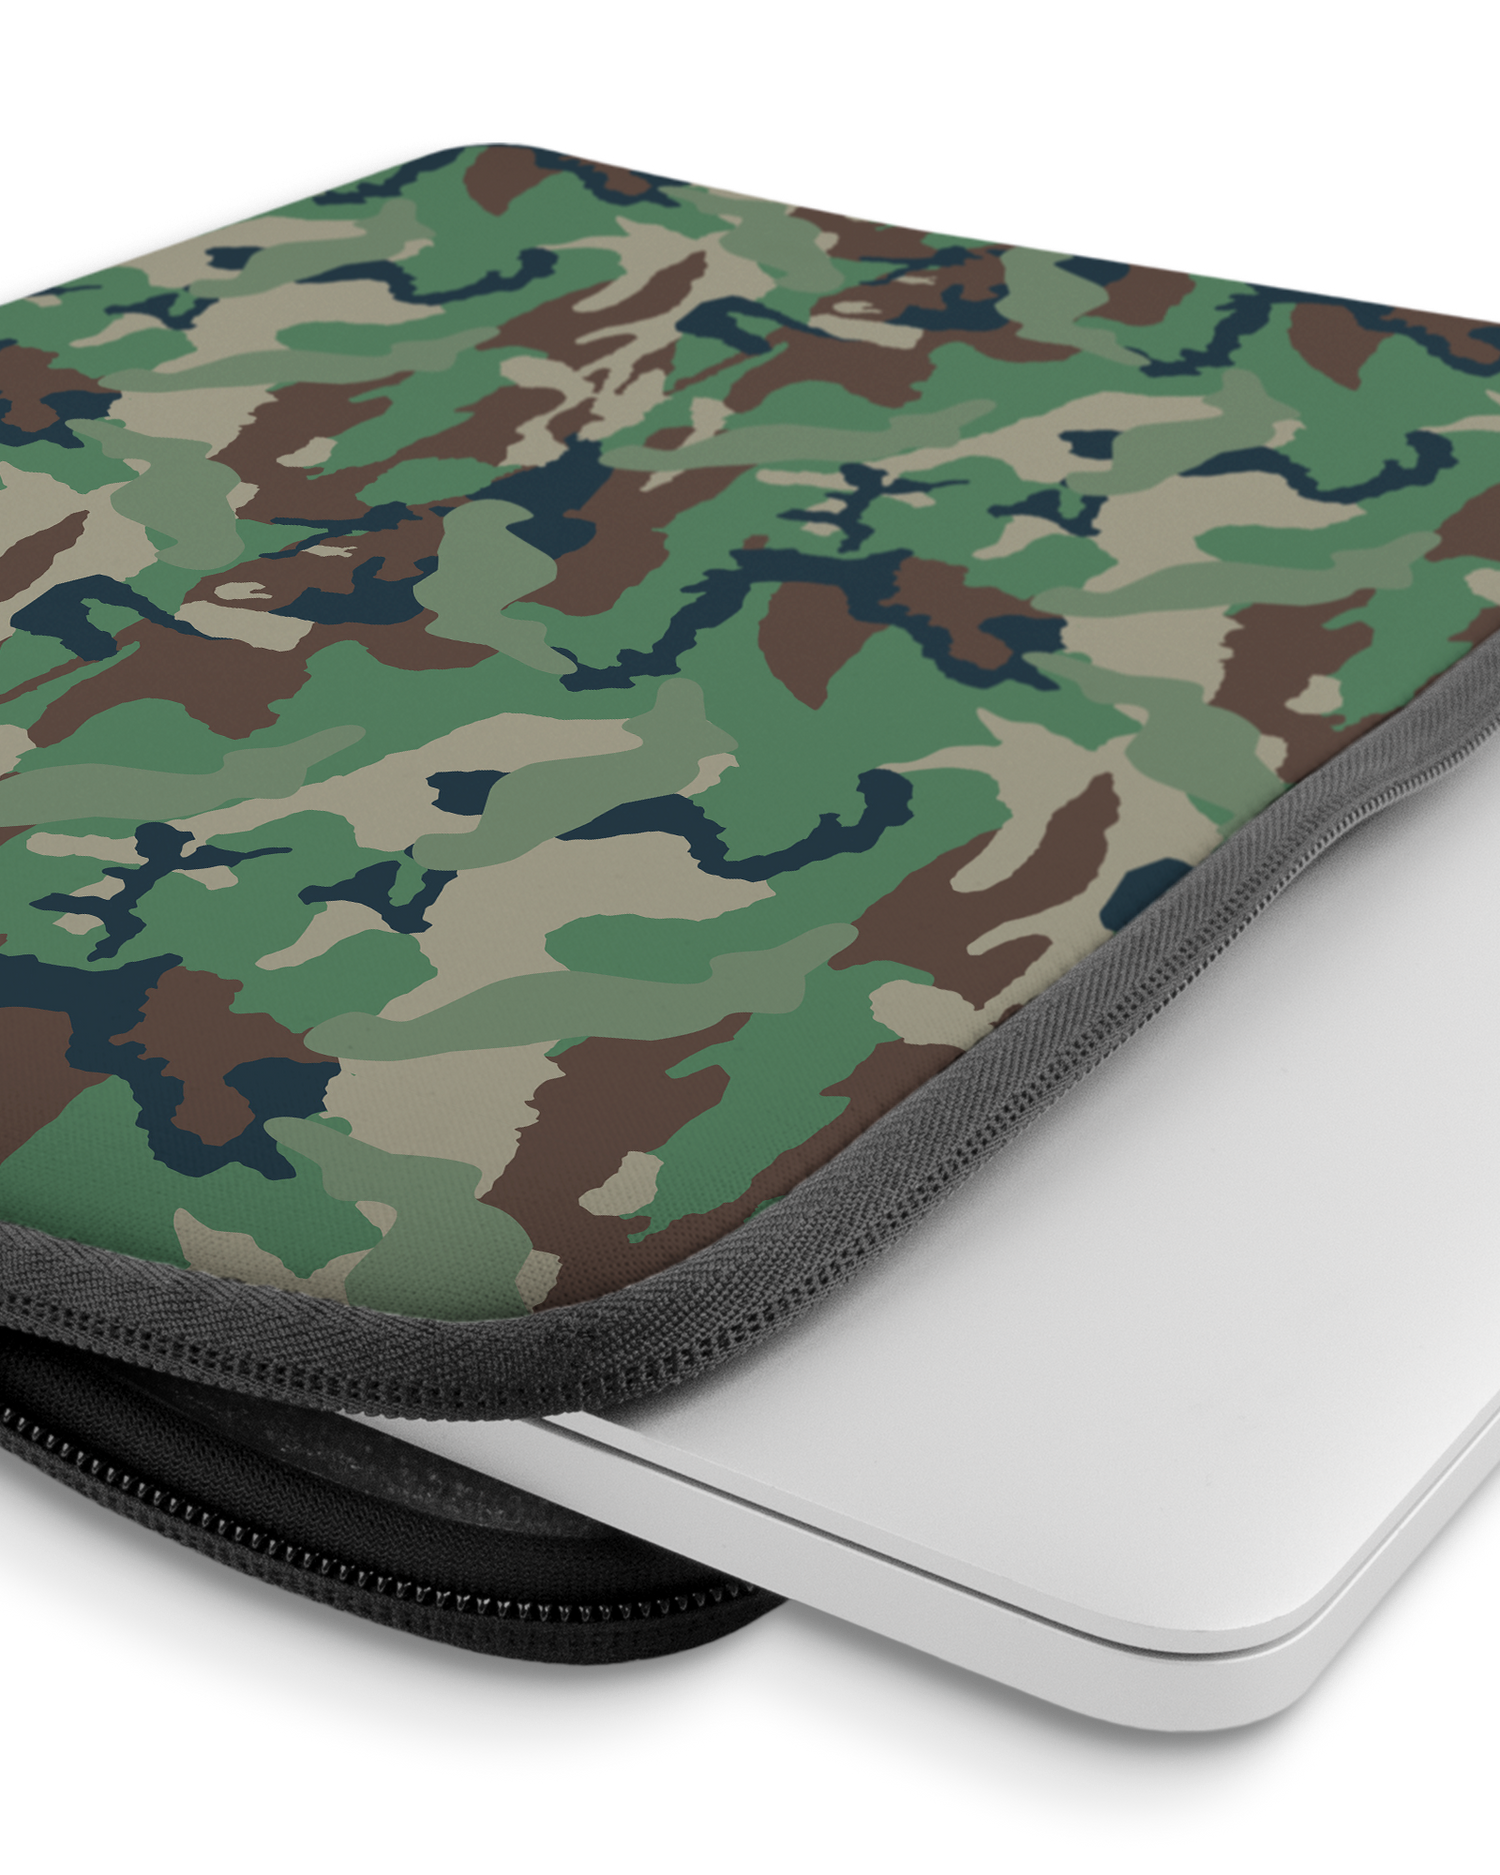 Green and Brown Camo Laptop Case 14 inch with device inside